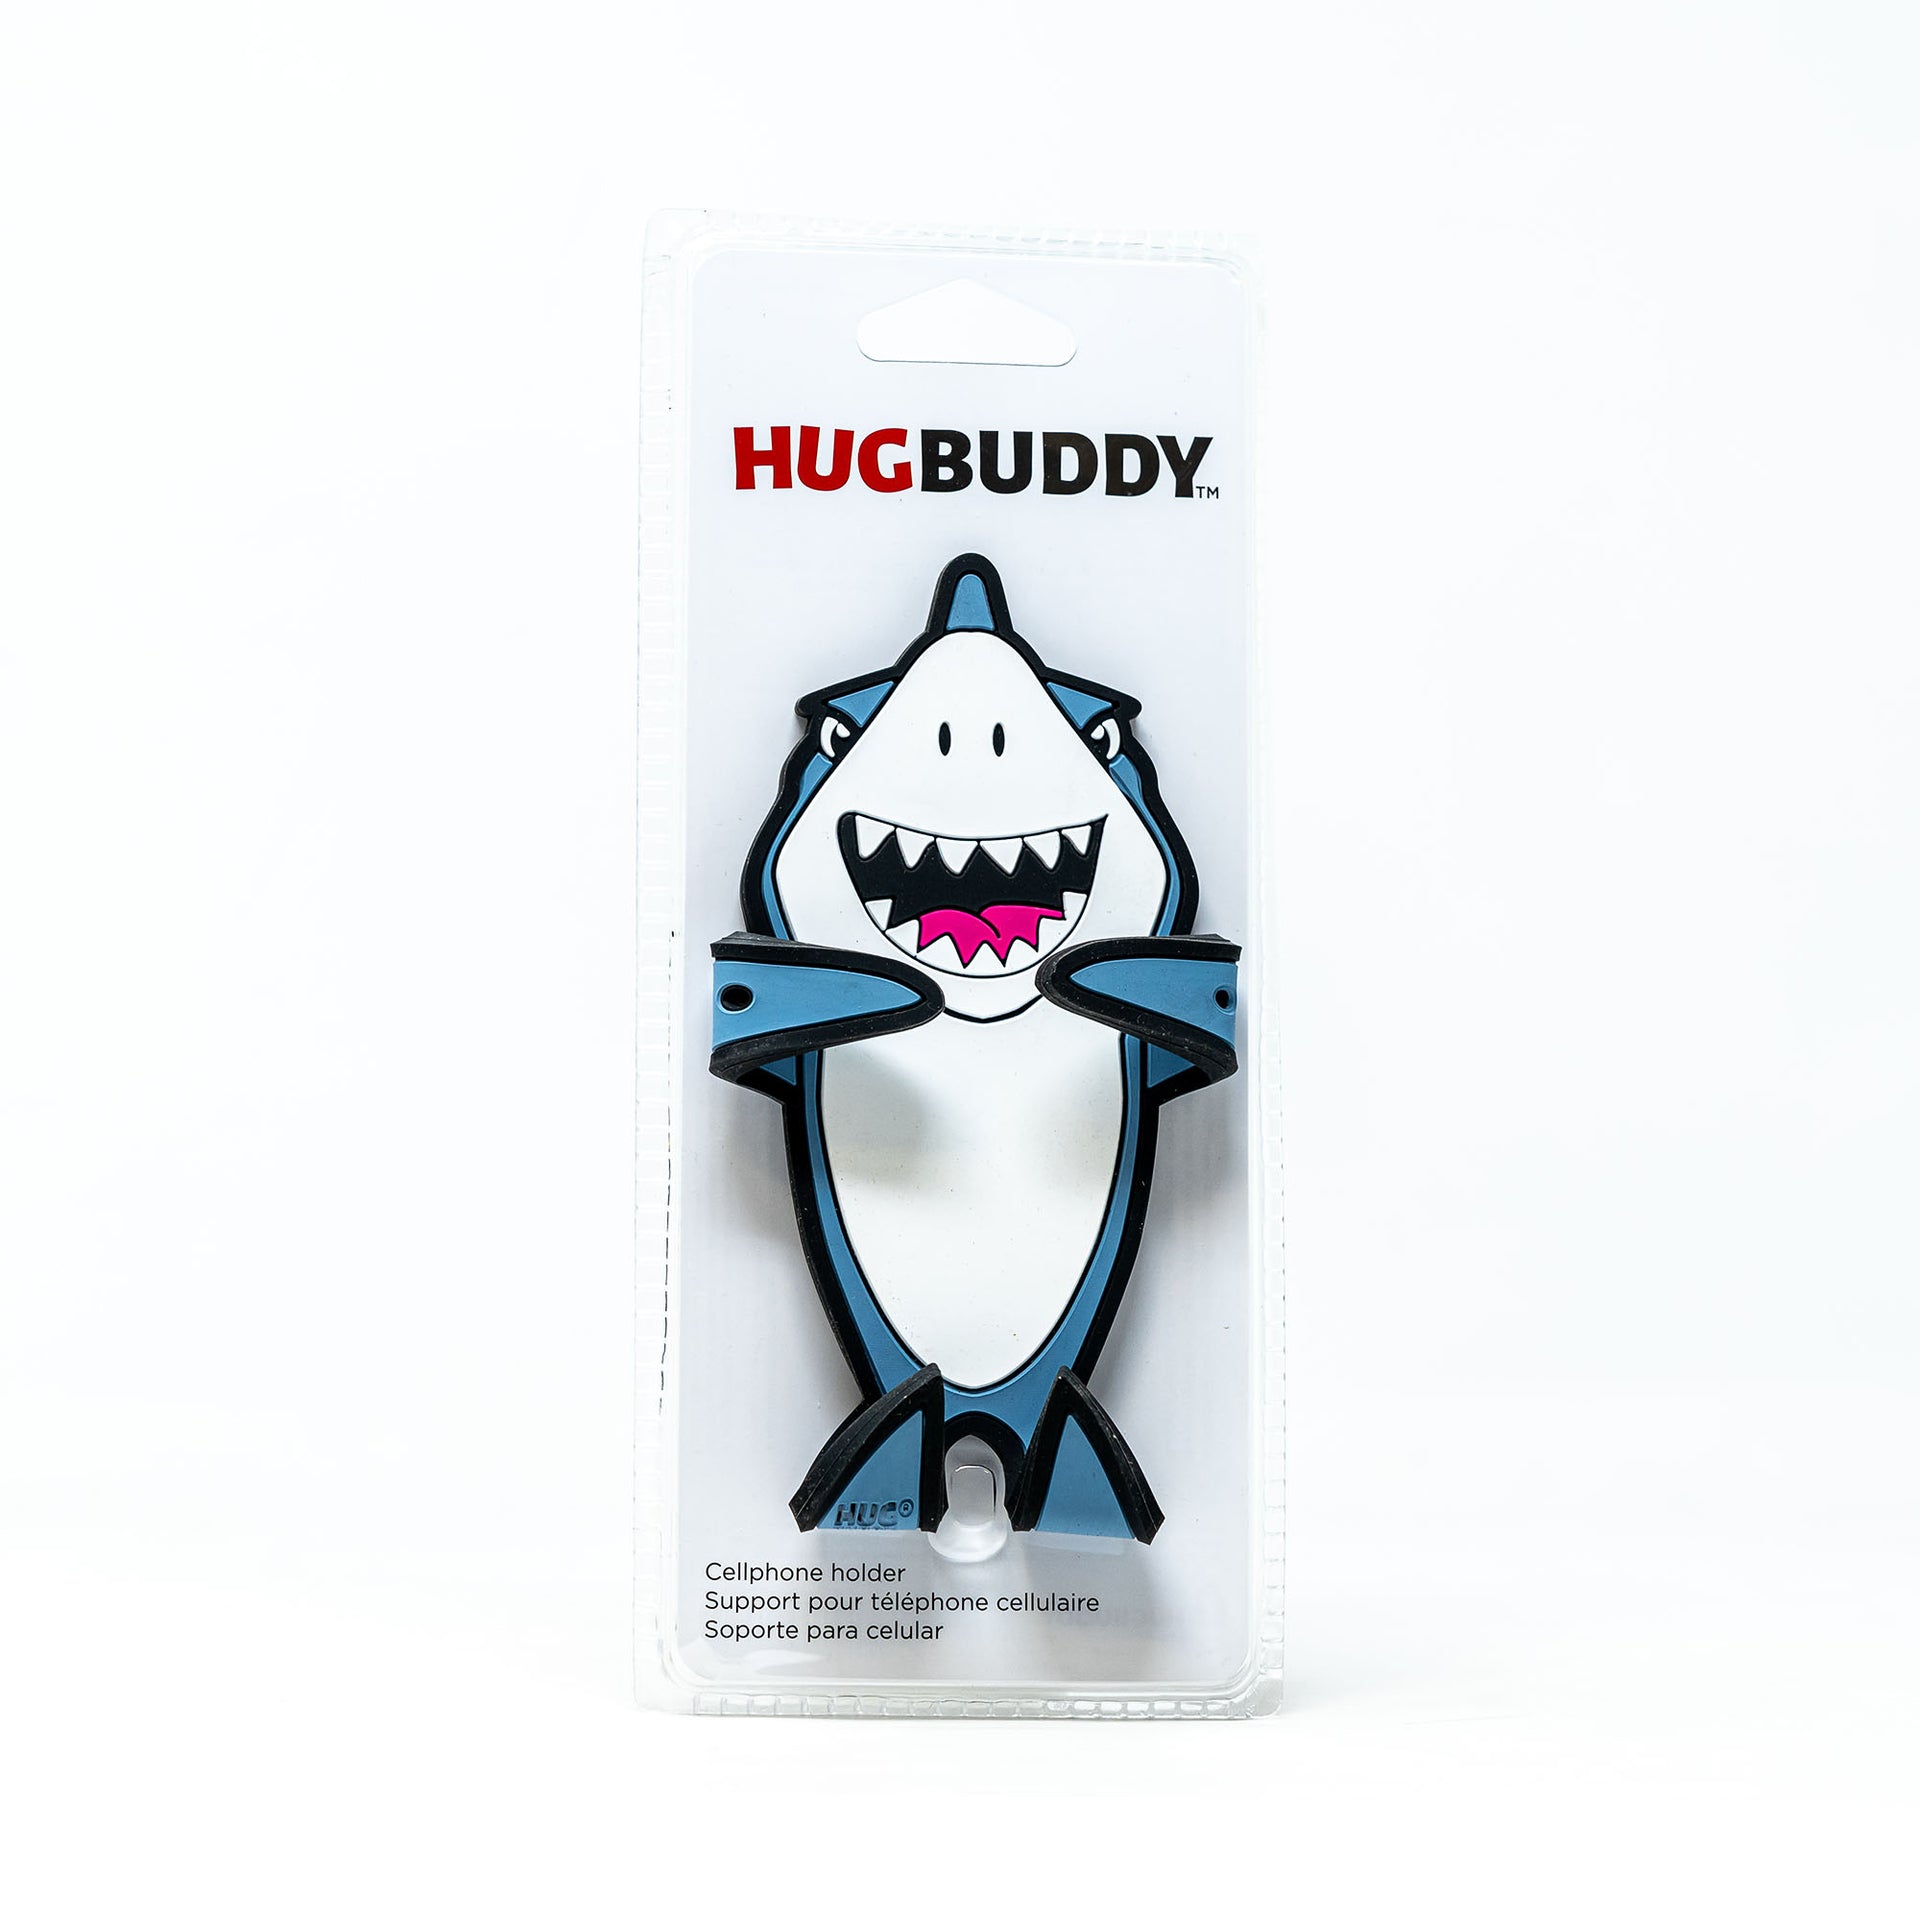 Image of Jaws the Shark Hug Buddy packaging front view